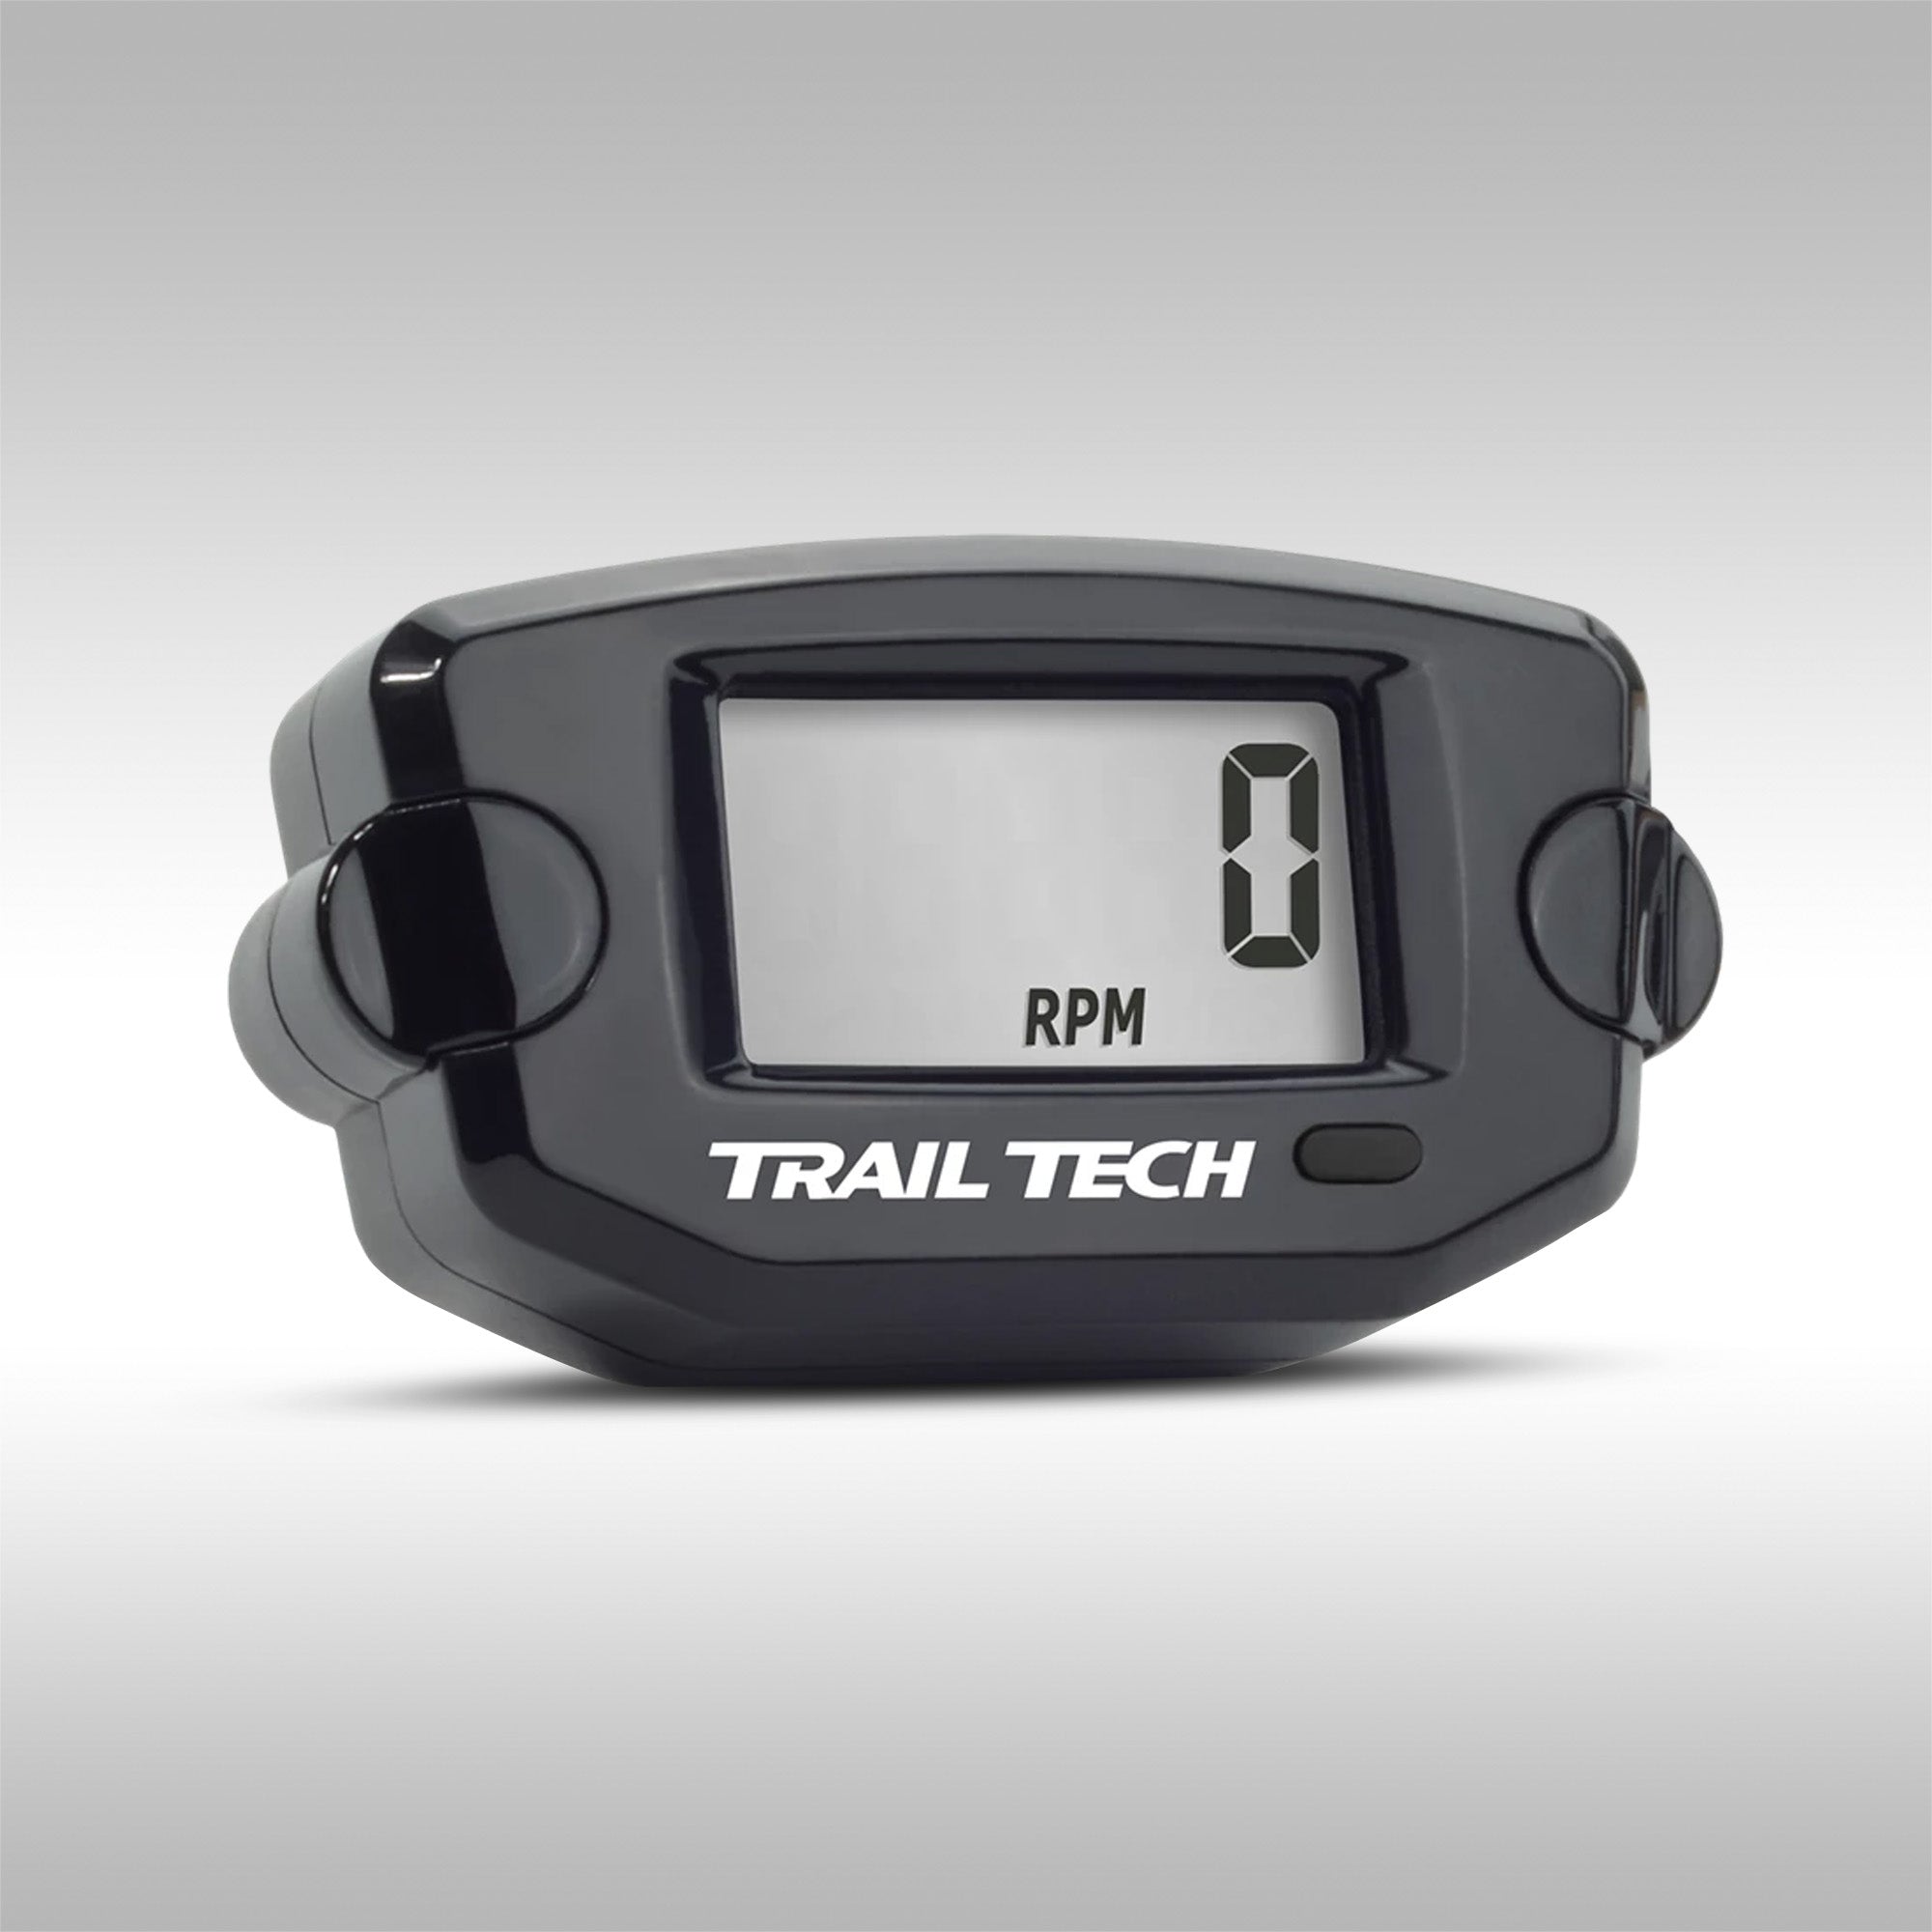 digital tachometer and hour gauge allows you to easily monitor RPM and hours of use. Large readable display allows you to easily monitor your engine's running hours up to 99,999 total hours ensuring that you perform proper maintenance on your engine. Motorcycle engine maintenance intervals tracked.